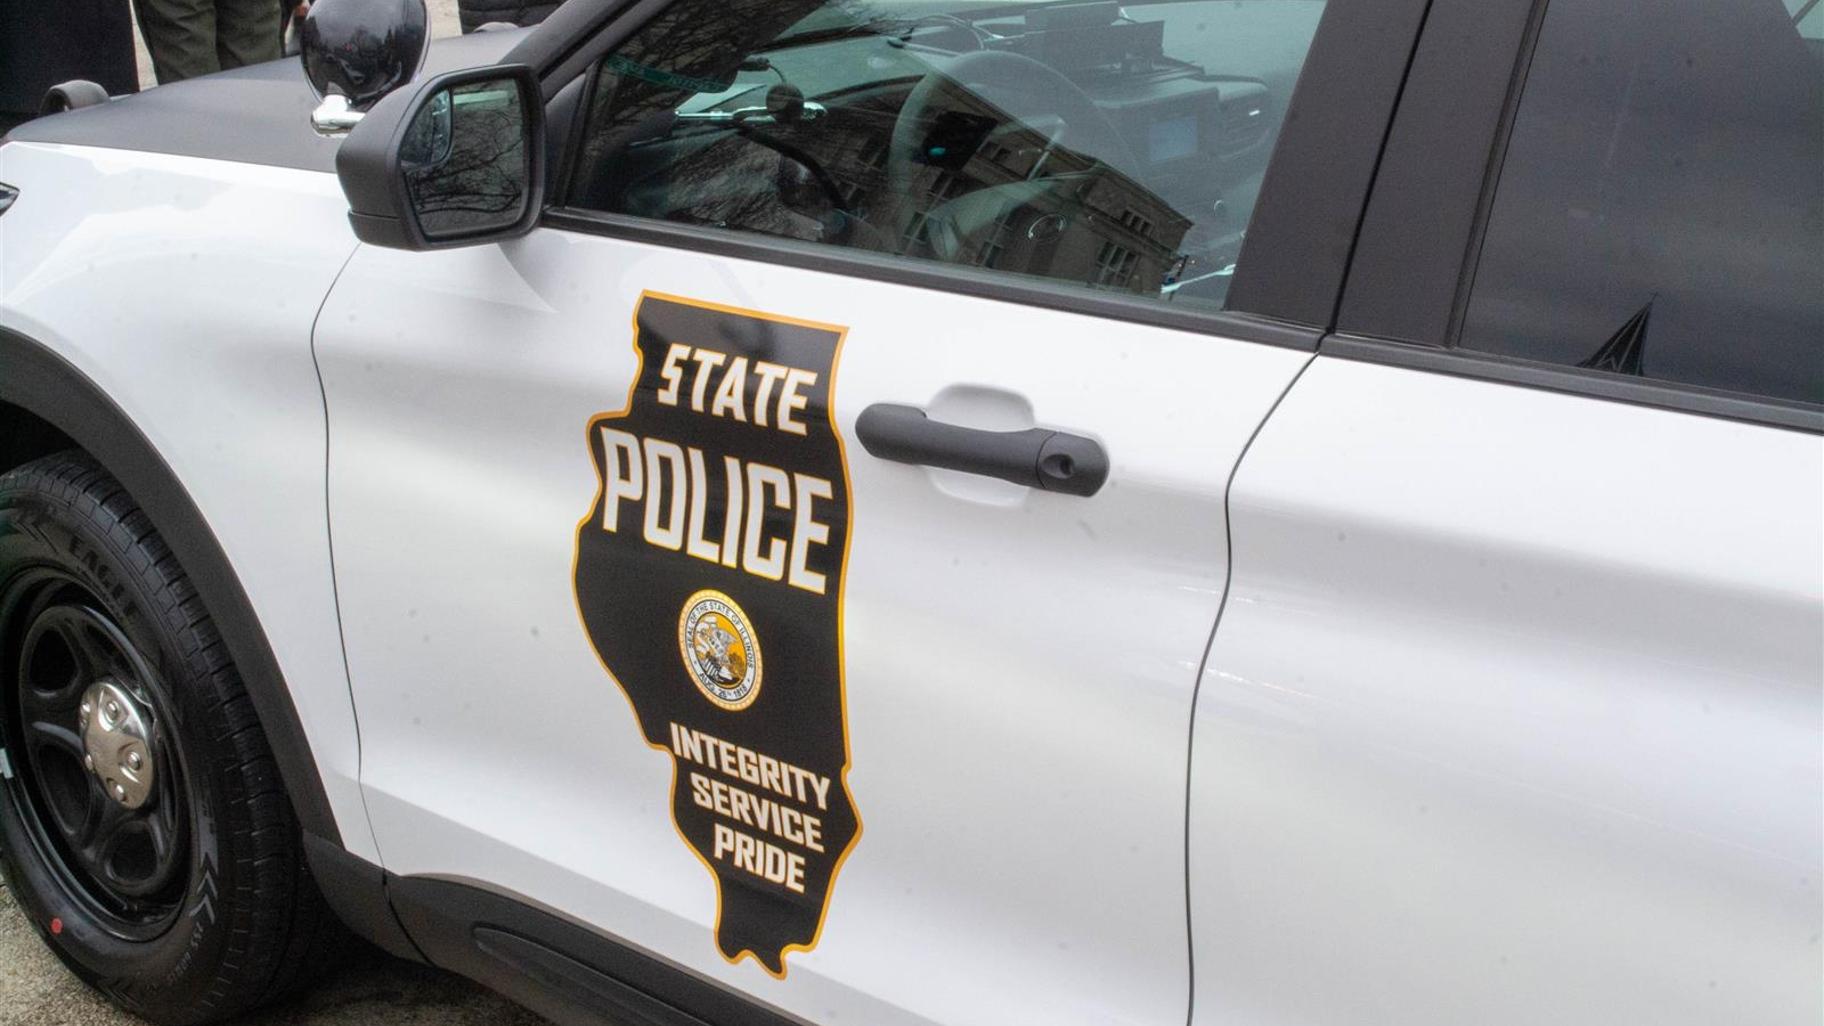 An Illinois State Police squad car is pictured in a file photo. (Jerry Nowicki / Capitol News Illinois)